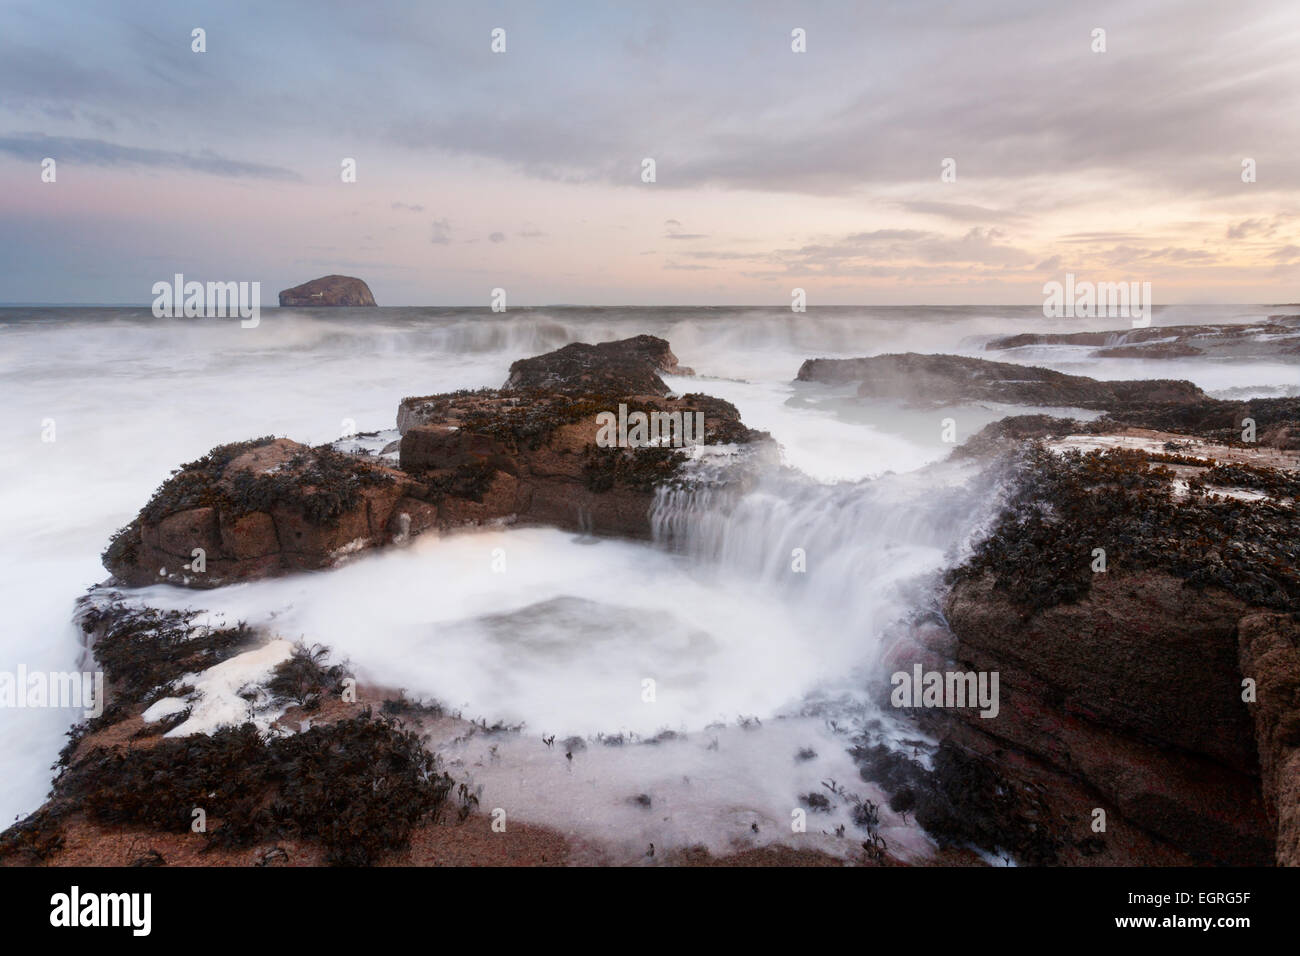 A large wave causes a tidal pool to fill up, Seacliff Beach. Stock Photo